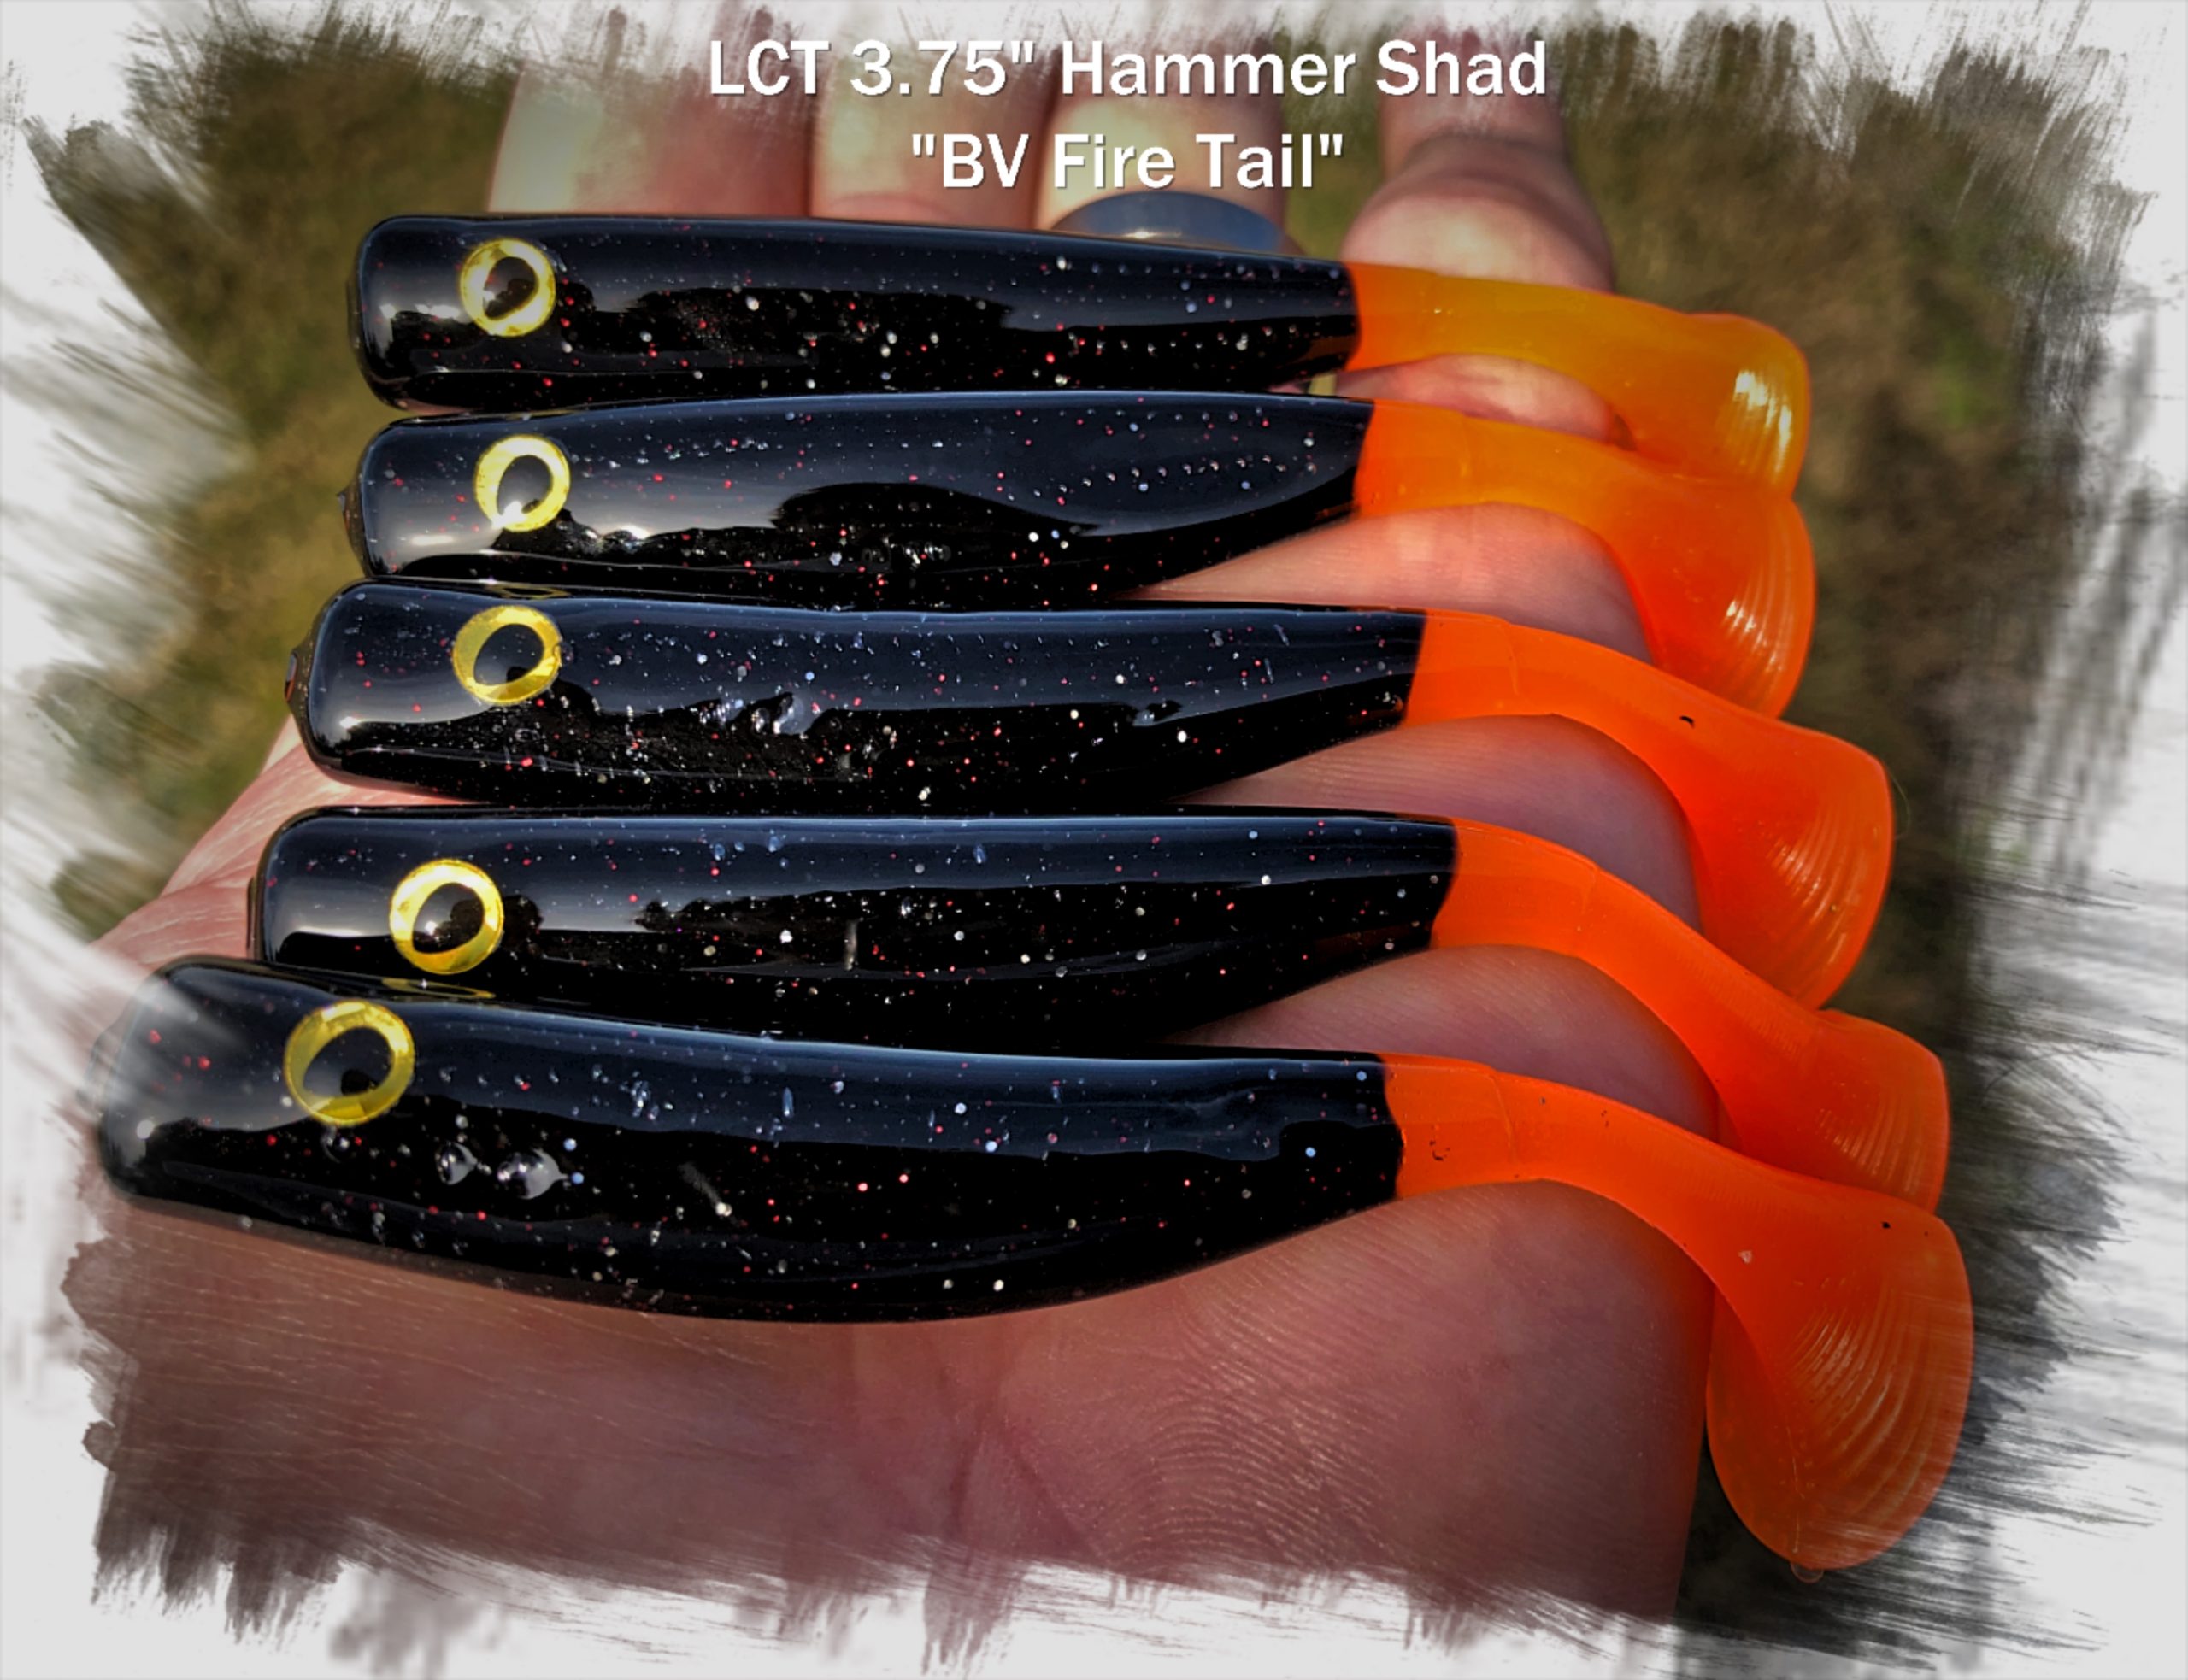 LCT 3.75 Hammer Shad (5 Pack) BV Fire Tail